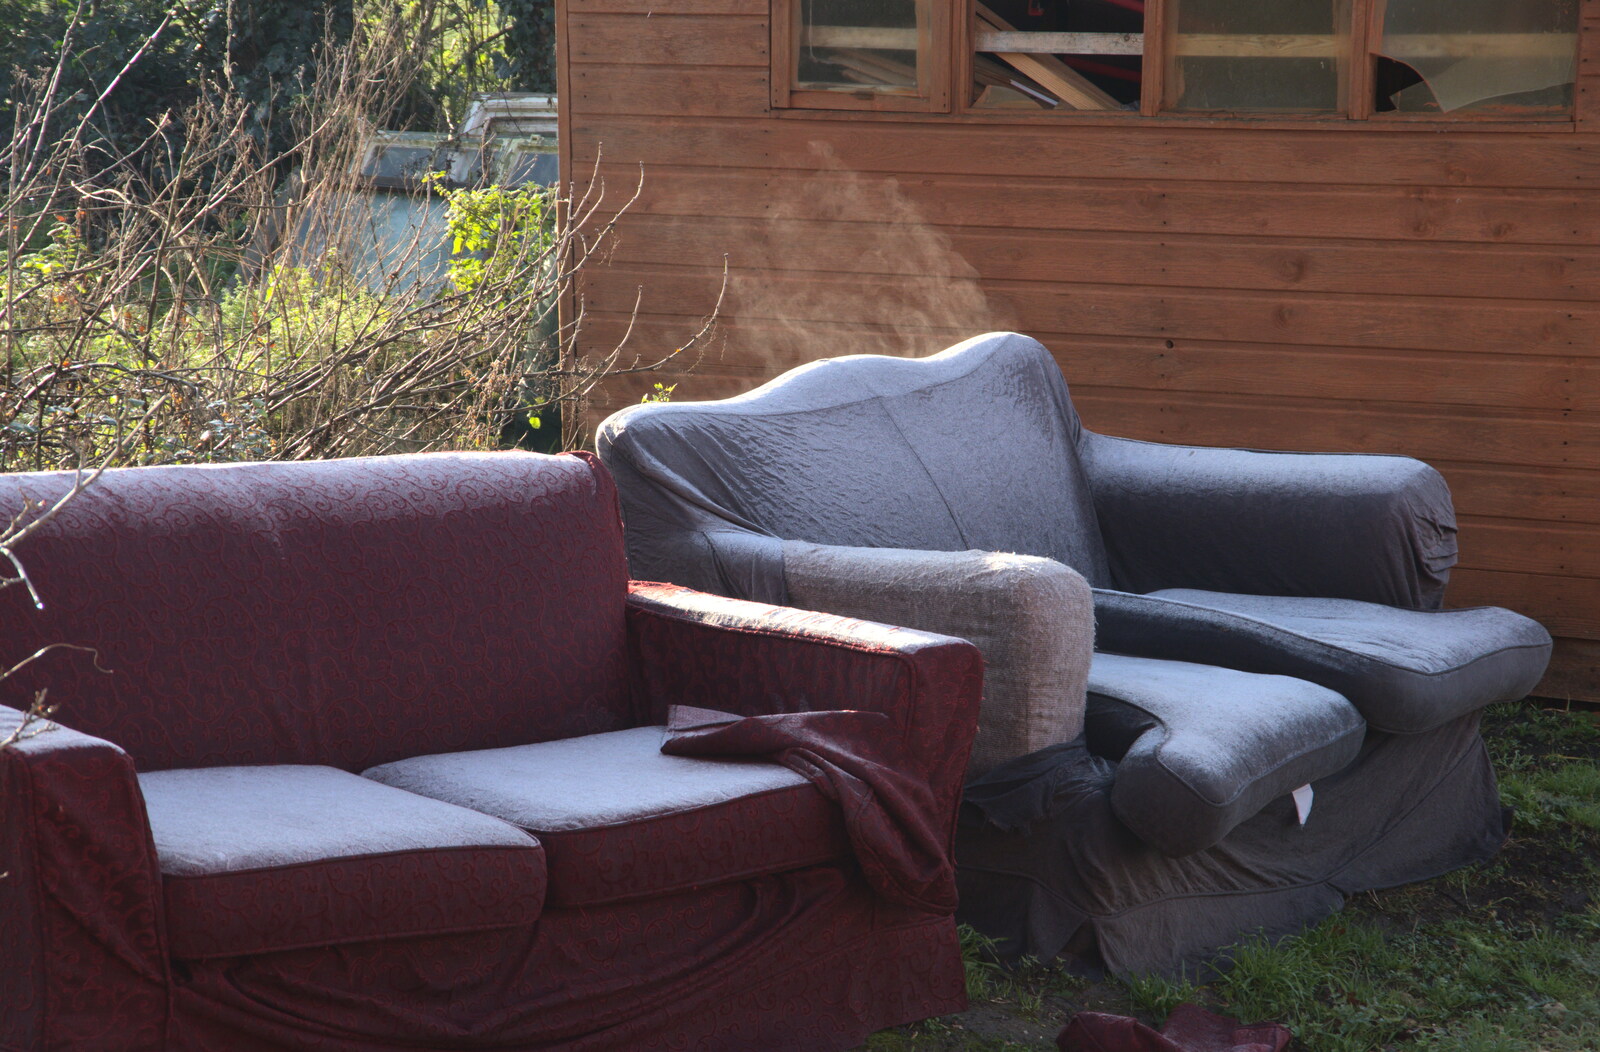 One of the sofas steams in the sun from Christmas Day, Brome, Suffolk - 25th December 2020